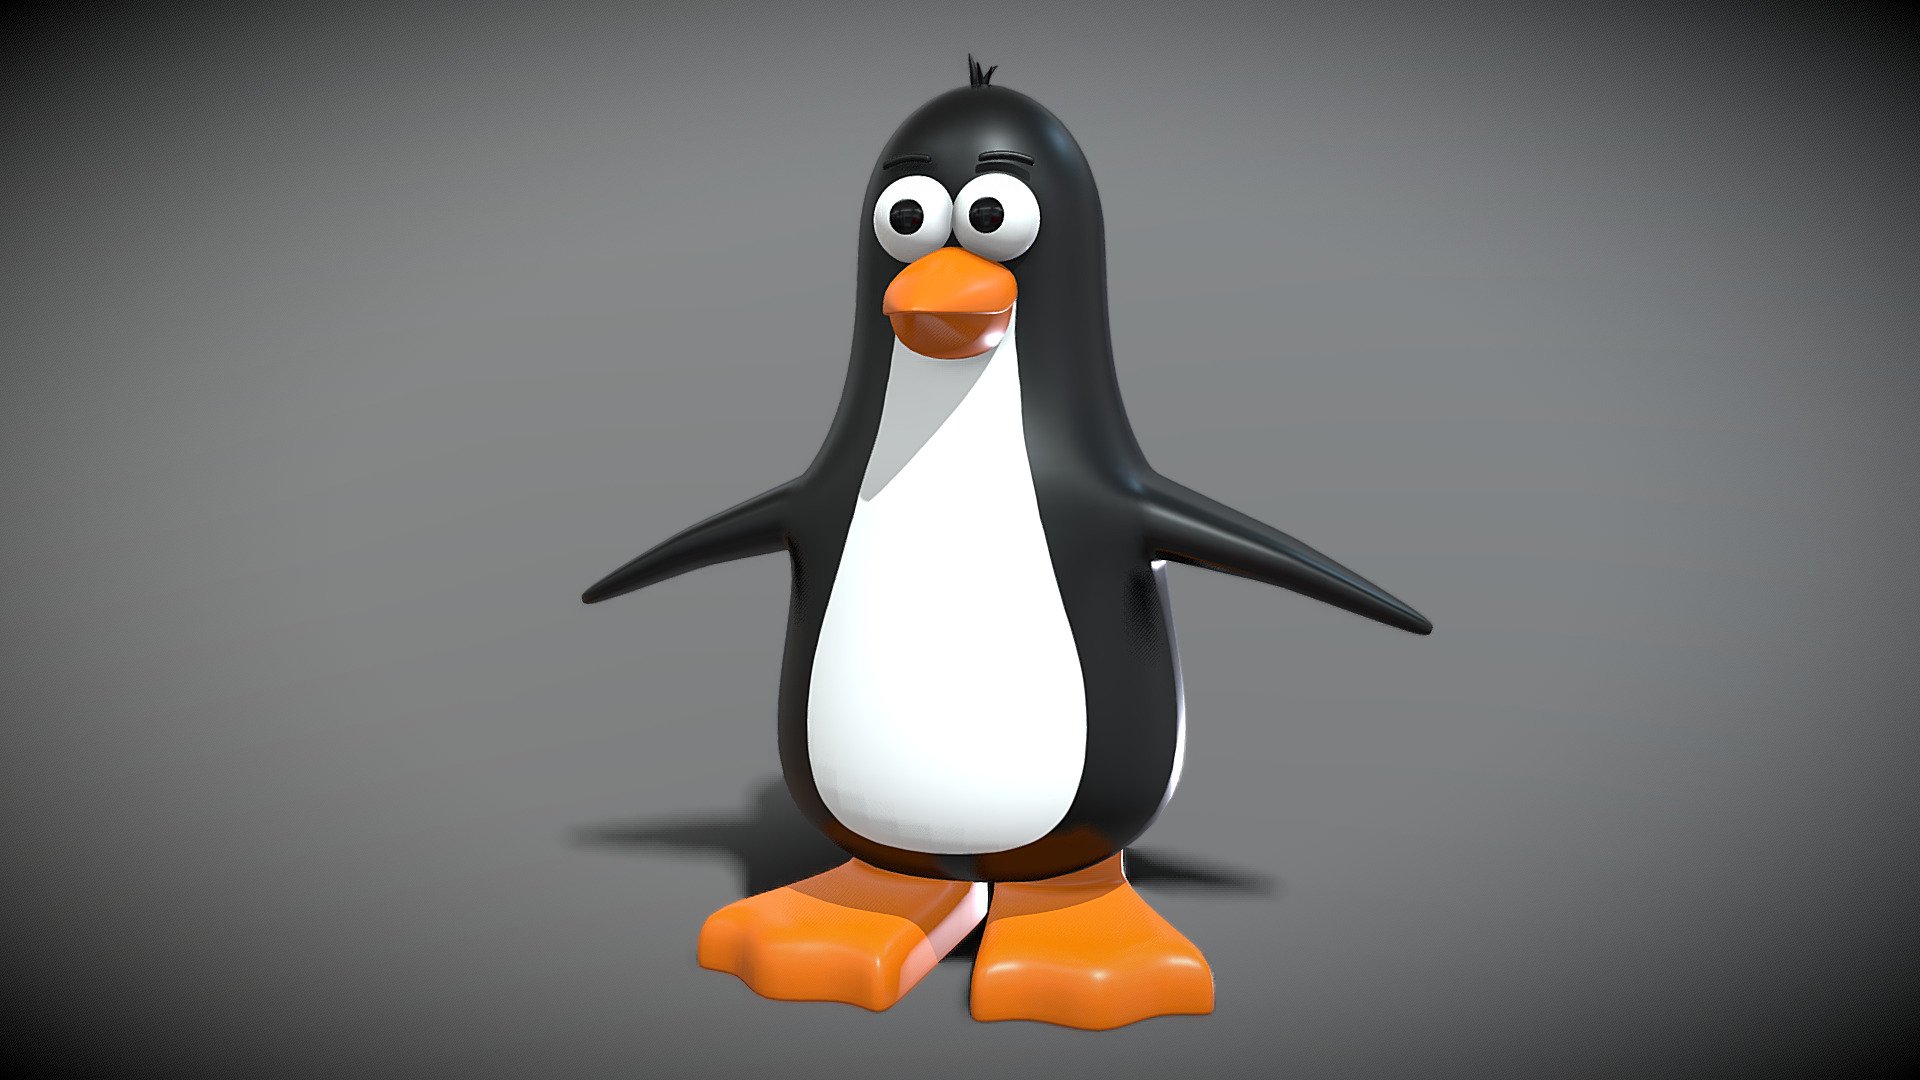 This is the tutorial result of my character creation for beginners Blender Tutorial series. 🐧

Watch the Tutorial Here:     https://youtu.be/BtRsCLGsDHI

Contents:


Stylized Penguin 3d Character Blender File (Rigged)
Stylized Penguin Animation File
Modeling Reference Images
4 Sound Effects Used in Animation
Penguin Texture
HDRI Lighting
Procedural Snow Material Blender File
Final Render
Final Animation
Video Editing Blender File
 - Stylized Penguin 3d Character (Rigged) - Buy Royalty Free 3D model by Ryan King Art (@ryankingart) 3d model